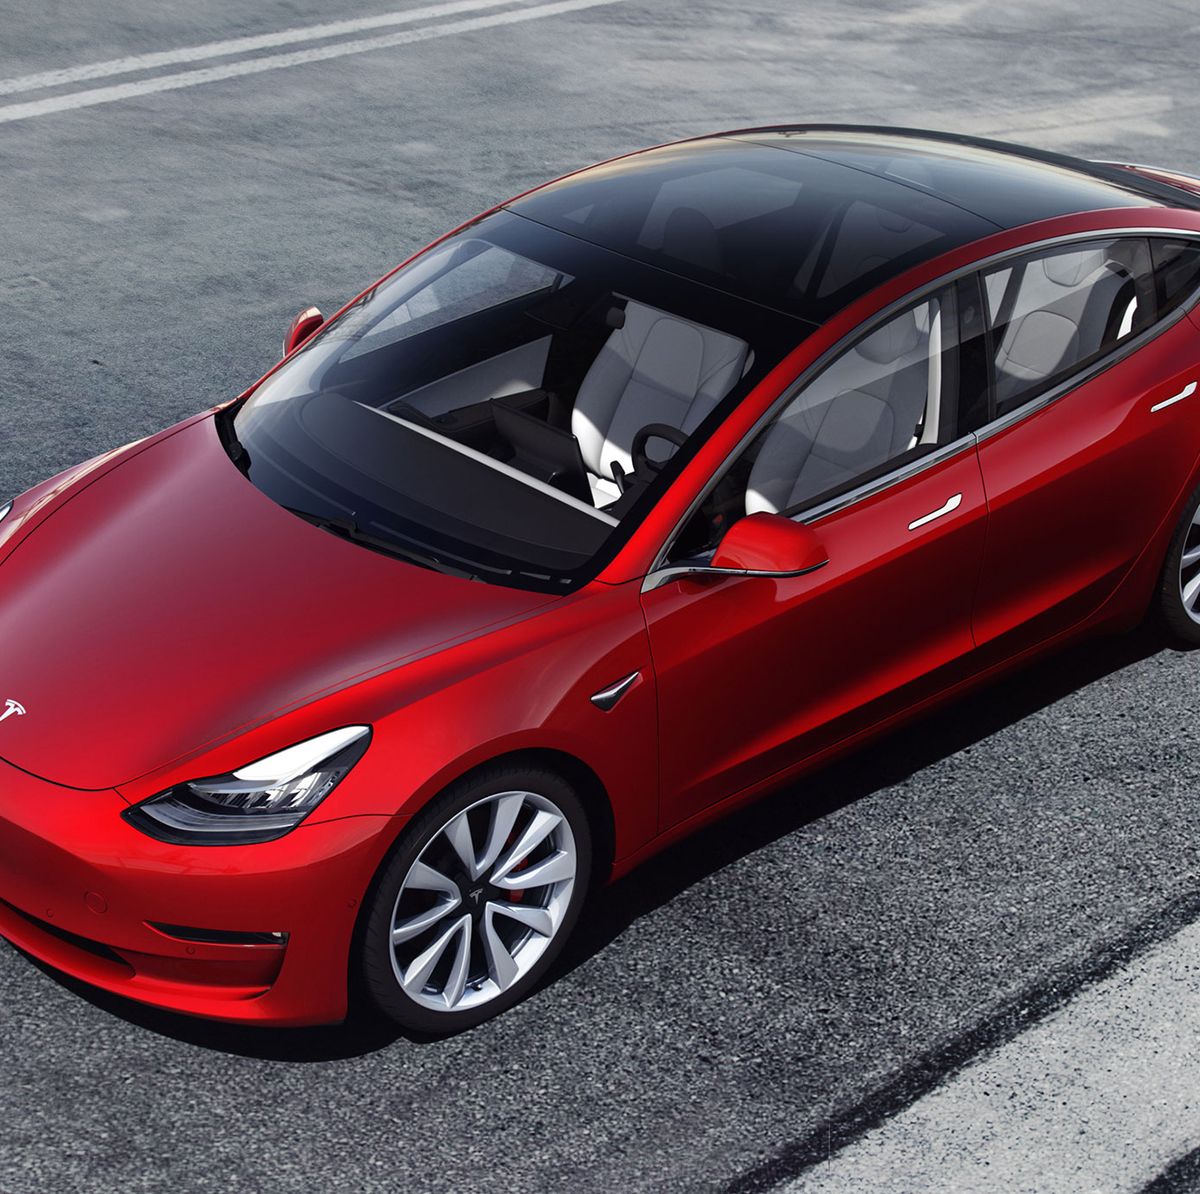 Tesla cuts price of power tailgate upgrade for Model 3 in China by